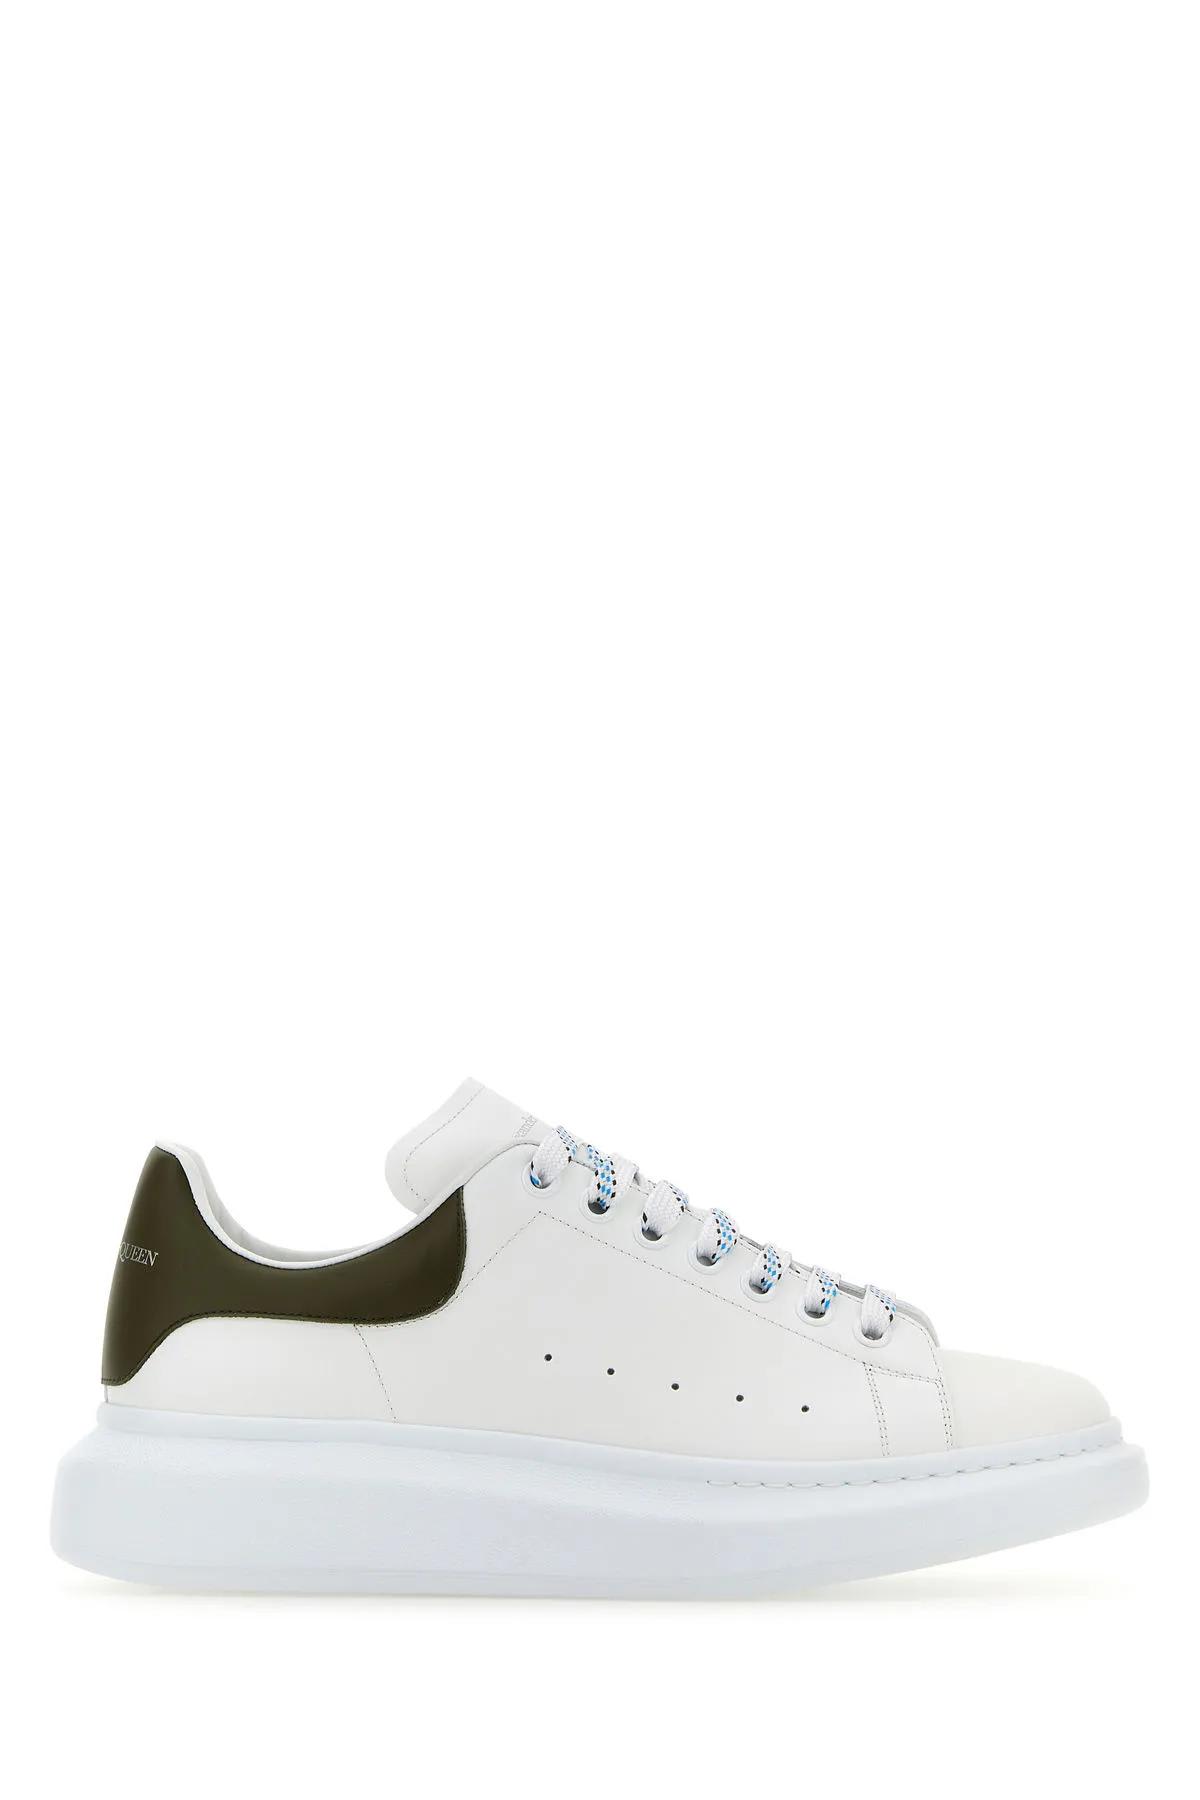 ALEXANDER MCQUEEN WHITE LEATHER trainers WITH ARMY GREEN LEATHER HEEL